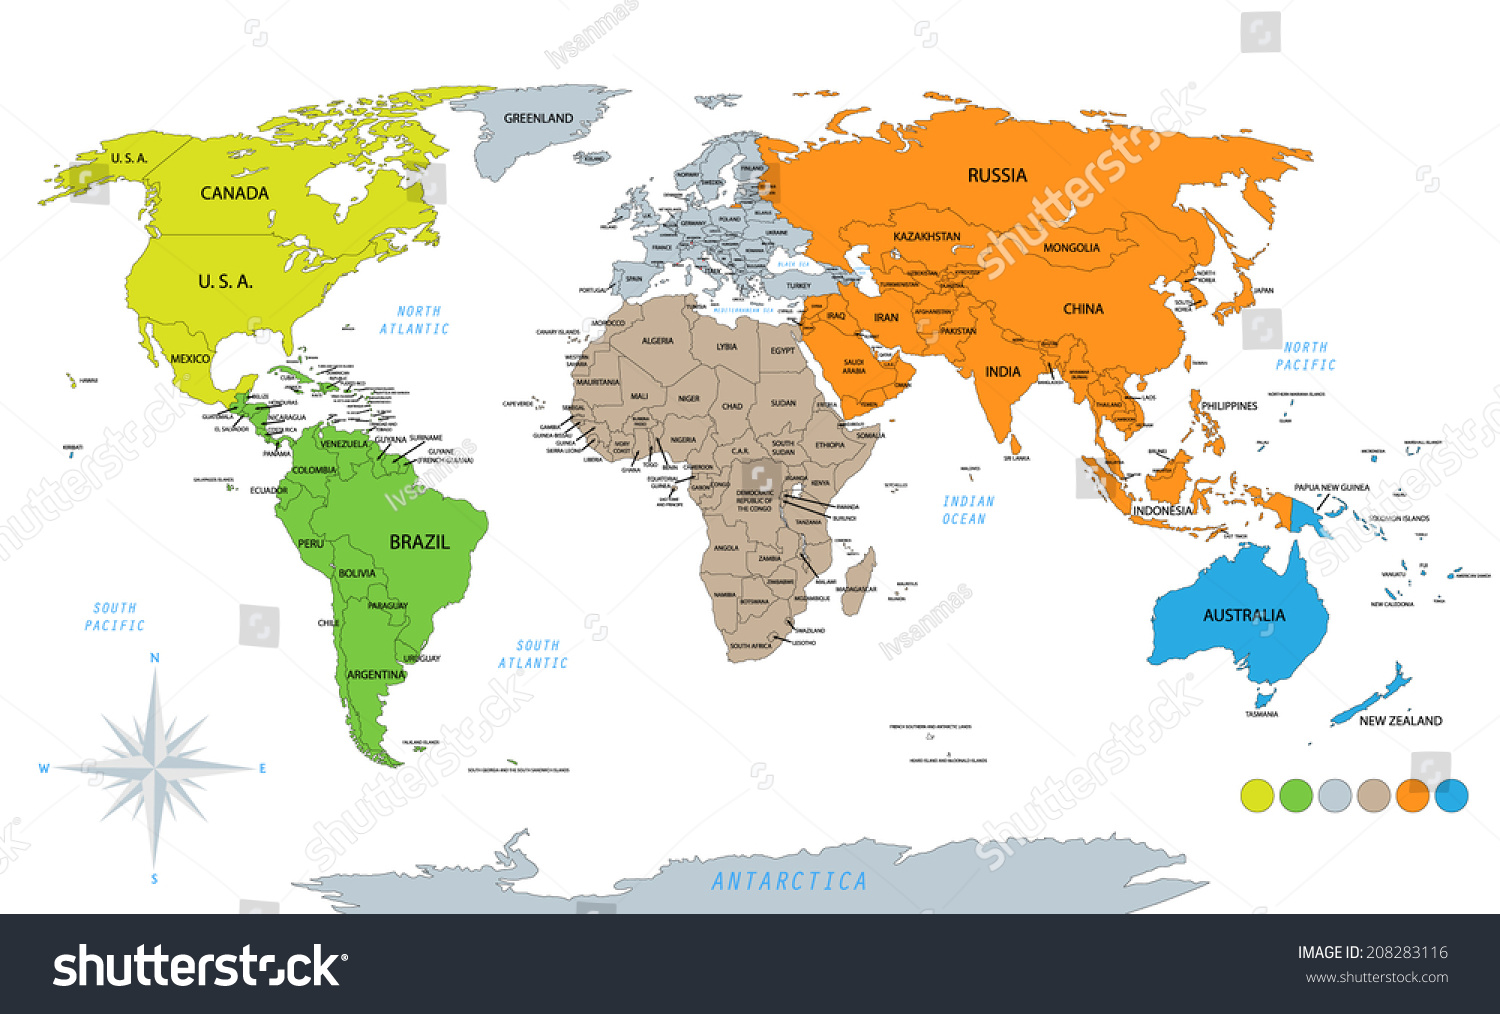 Map Of The World Color Off Countries Save to a lightbox